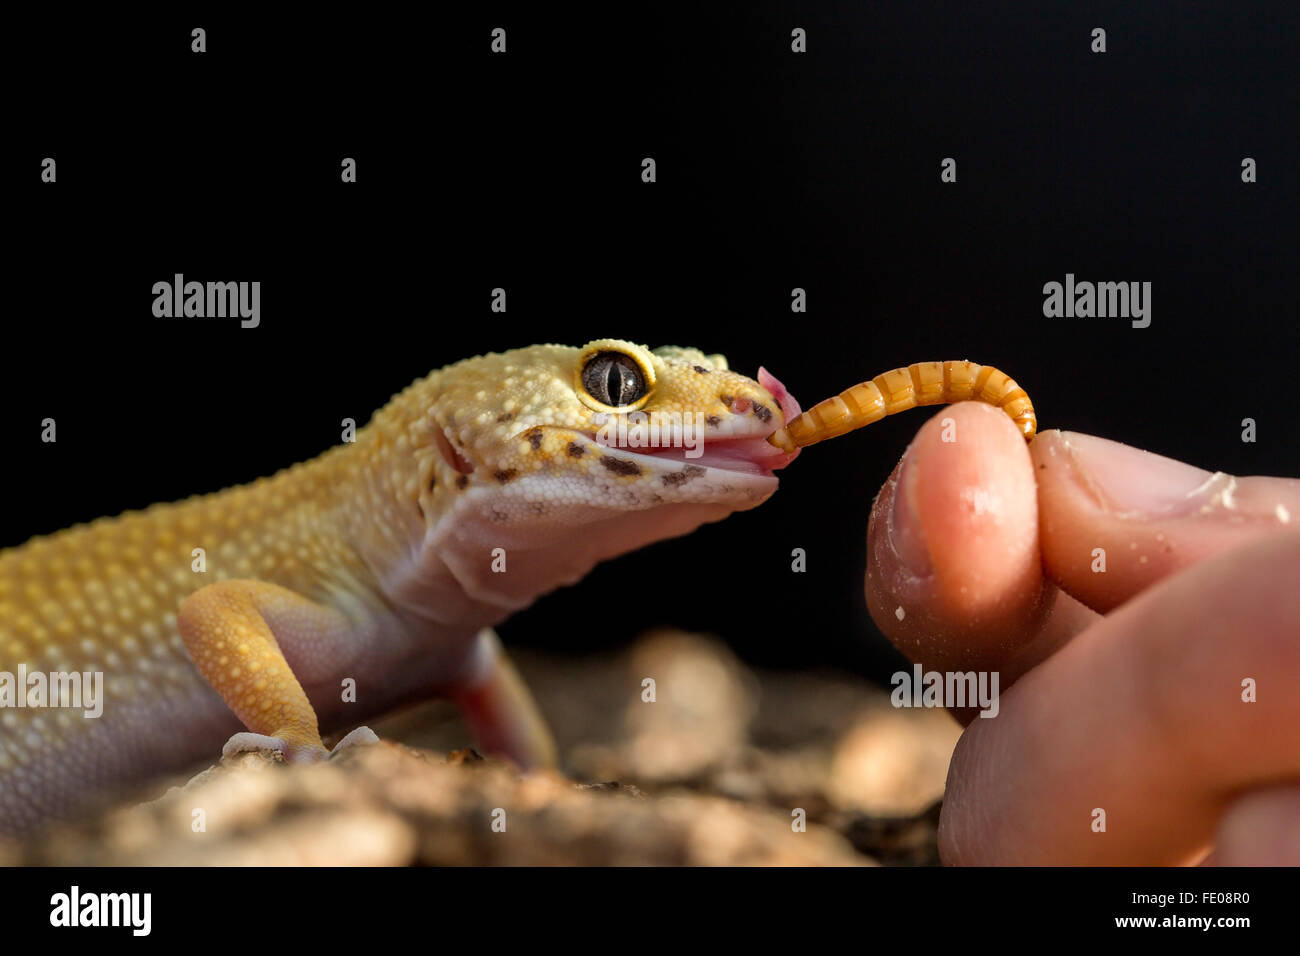 Closeup of a leopard gecko, Eublepharis macularius eating a mealworm from the hand Stock Photo